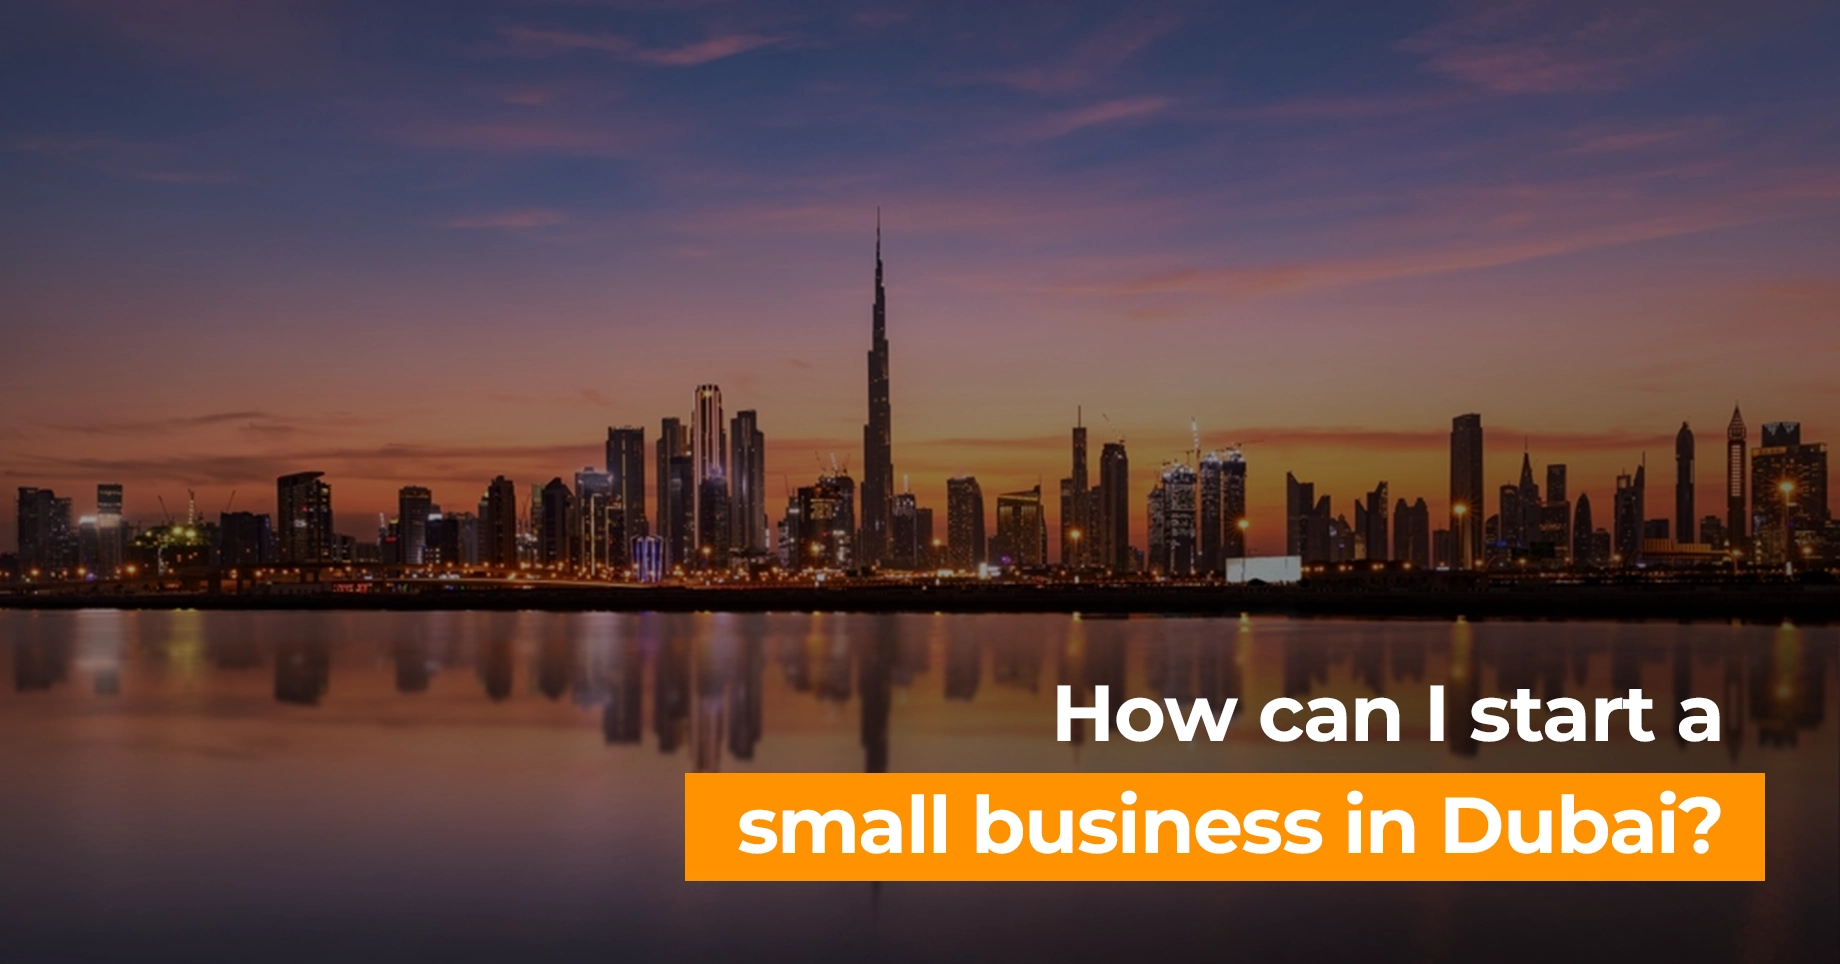 How to Start a Small Business in Dubai